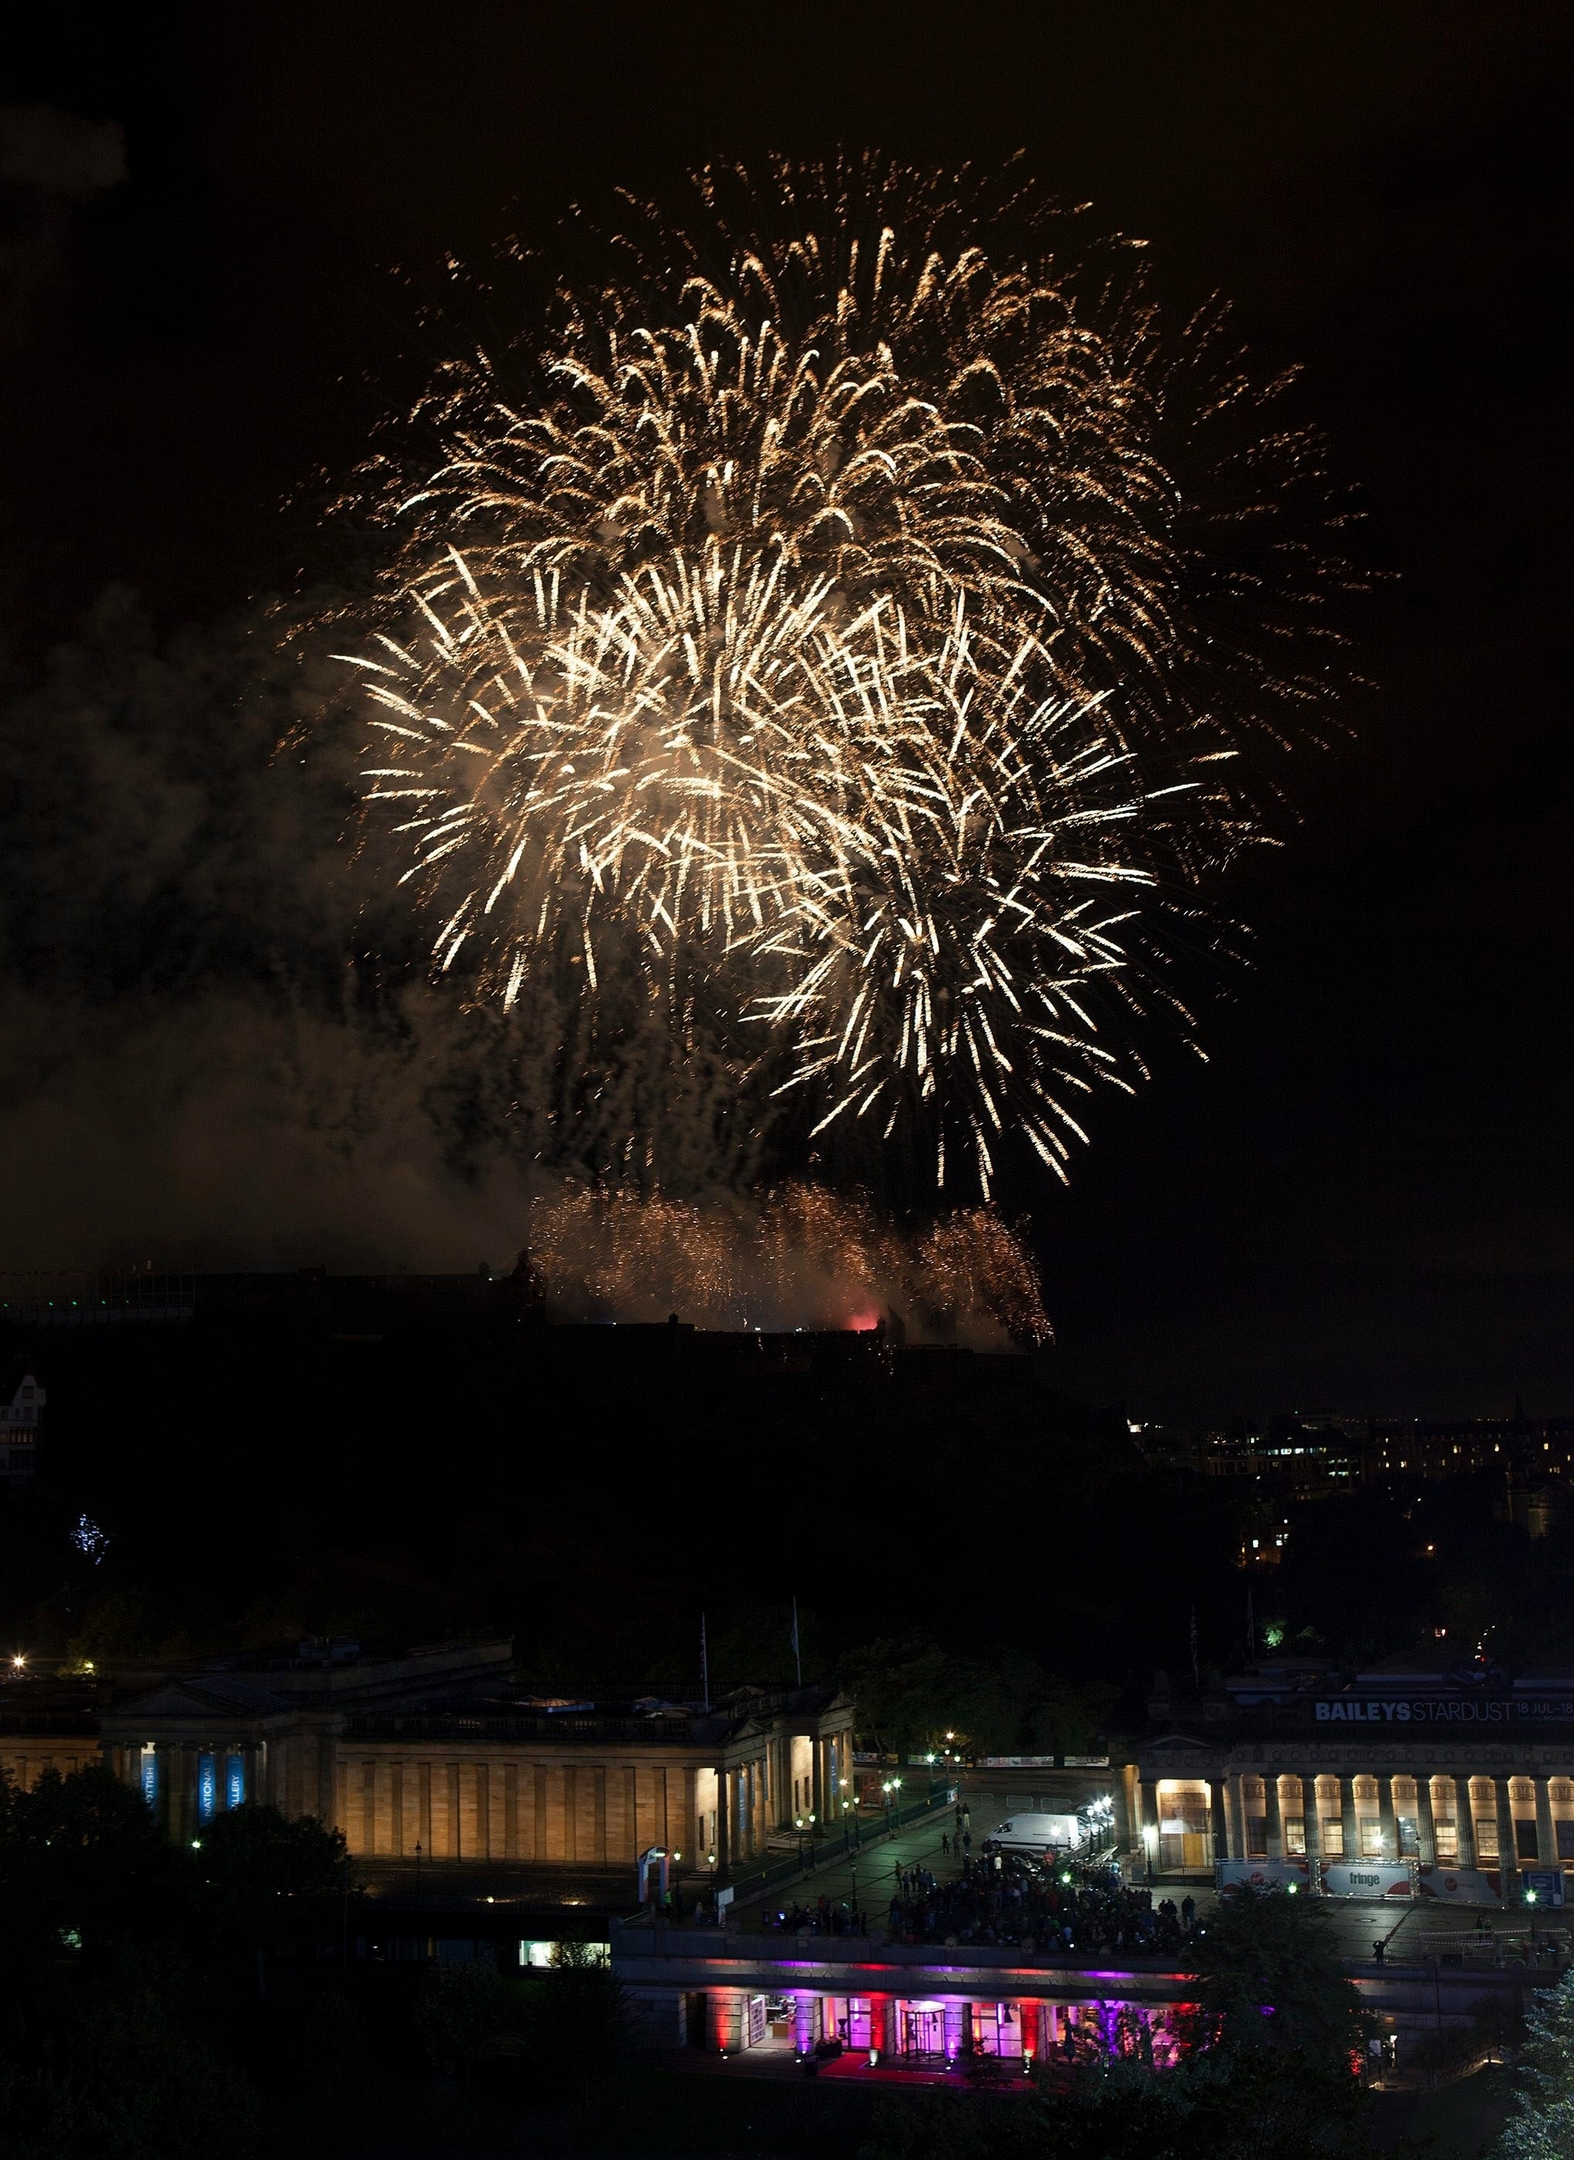 Fireworks light up the sky over Edinburgh to mark the end of the Festivals. The display closes the festival season with a 45 minute concert and more than 400,000 fireworks, choreographed to live orchestral music against the backdrop of Edinburgh Castle. August 31 2015